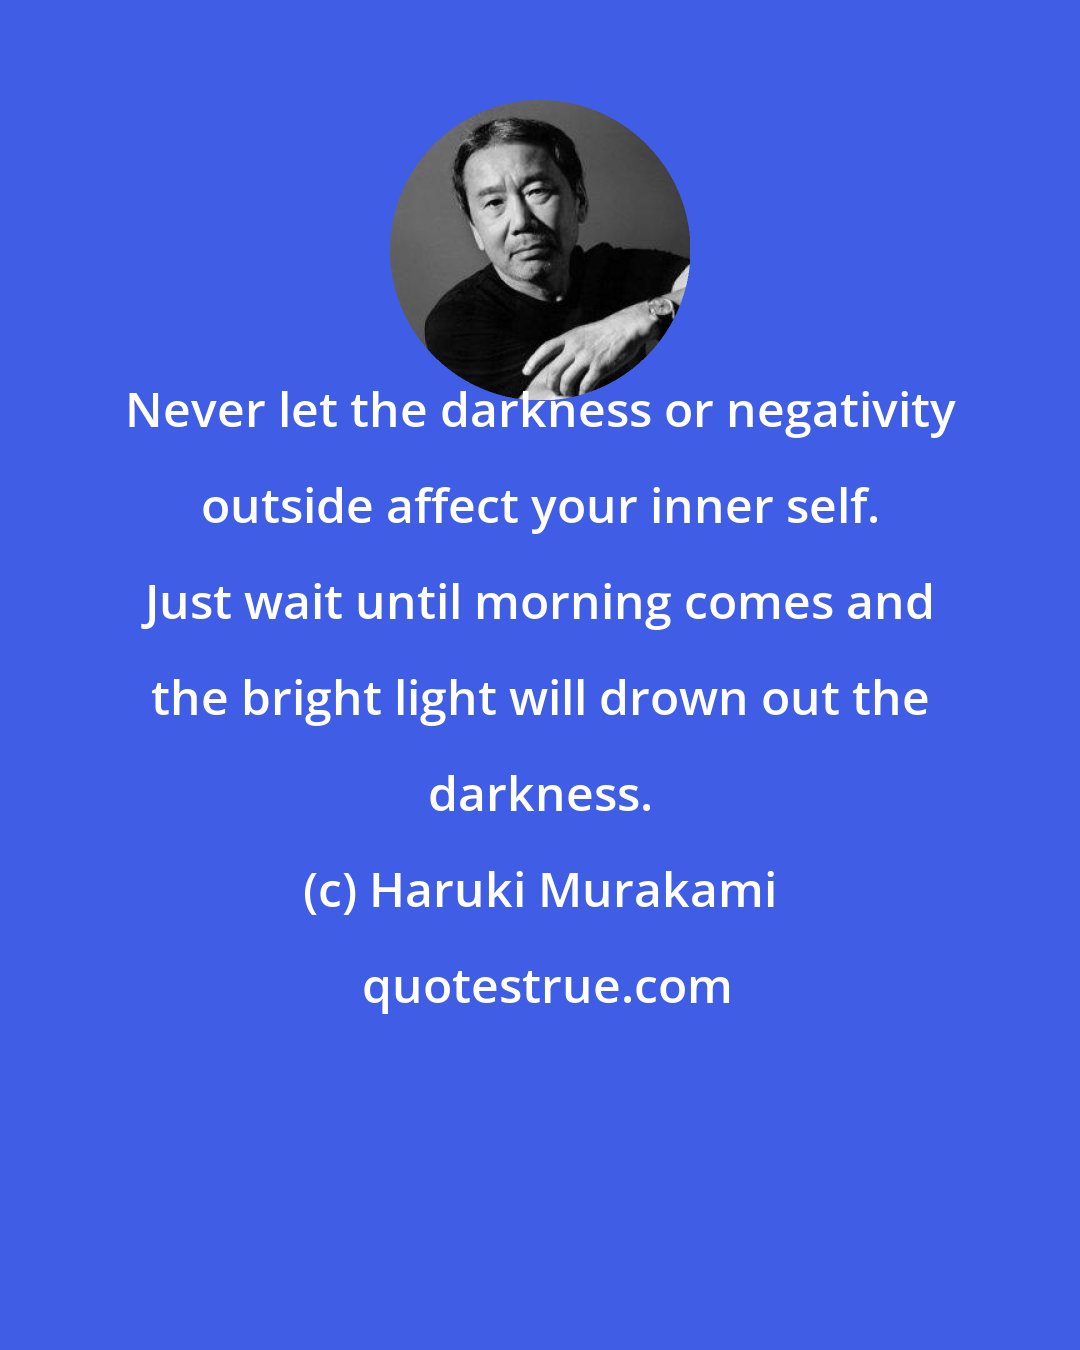 Haruki Murakami: Never let the darkness or negativity outside affect your inner self. Just wait until morning comes and the bright light will drown out the darkness.